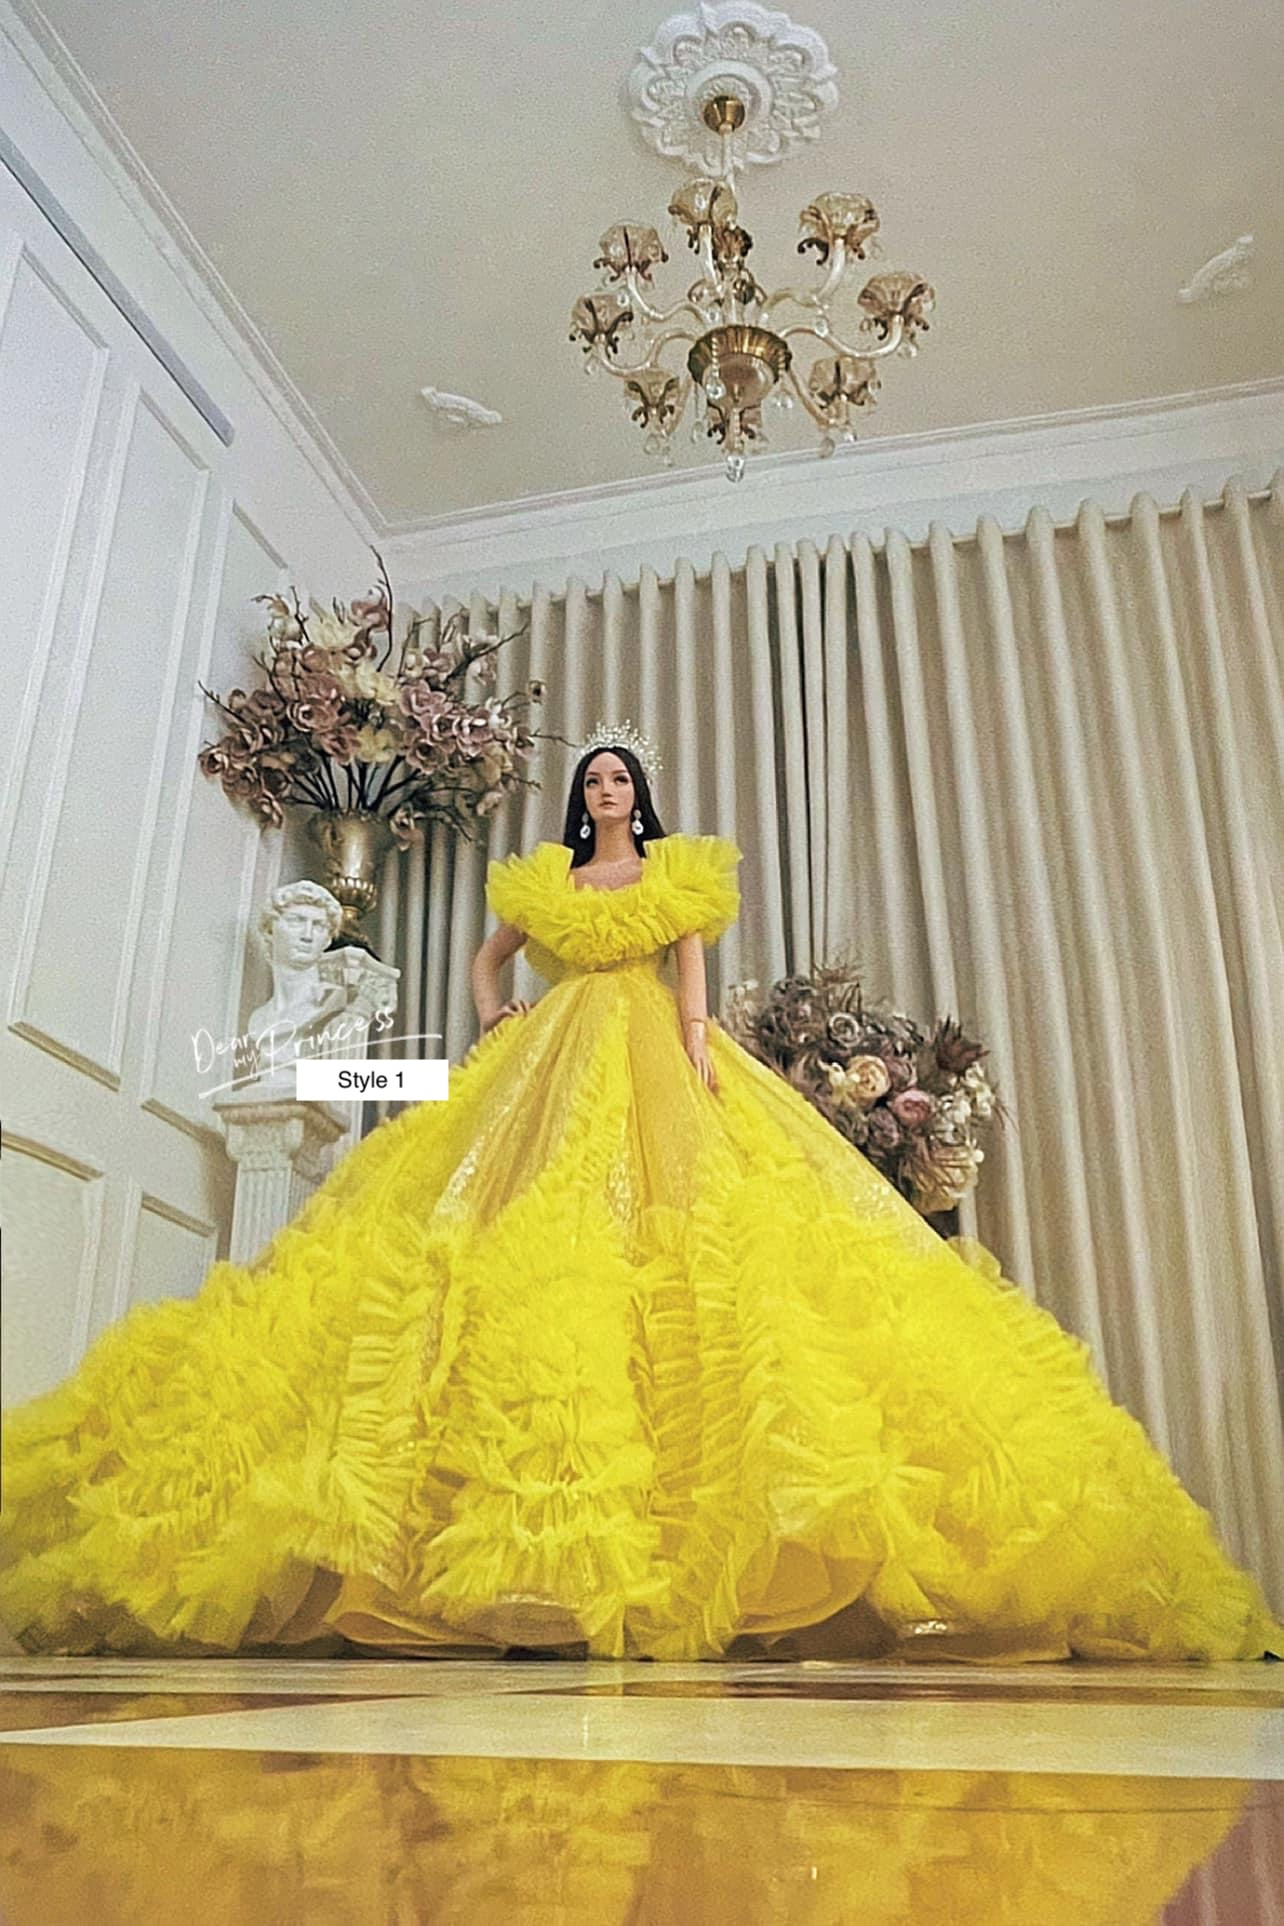 Yellow Embroidered Frill Gown Design by Keerthi Kadire at Pernia's Pop Up  Shop 2024